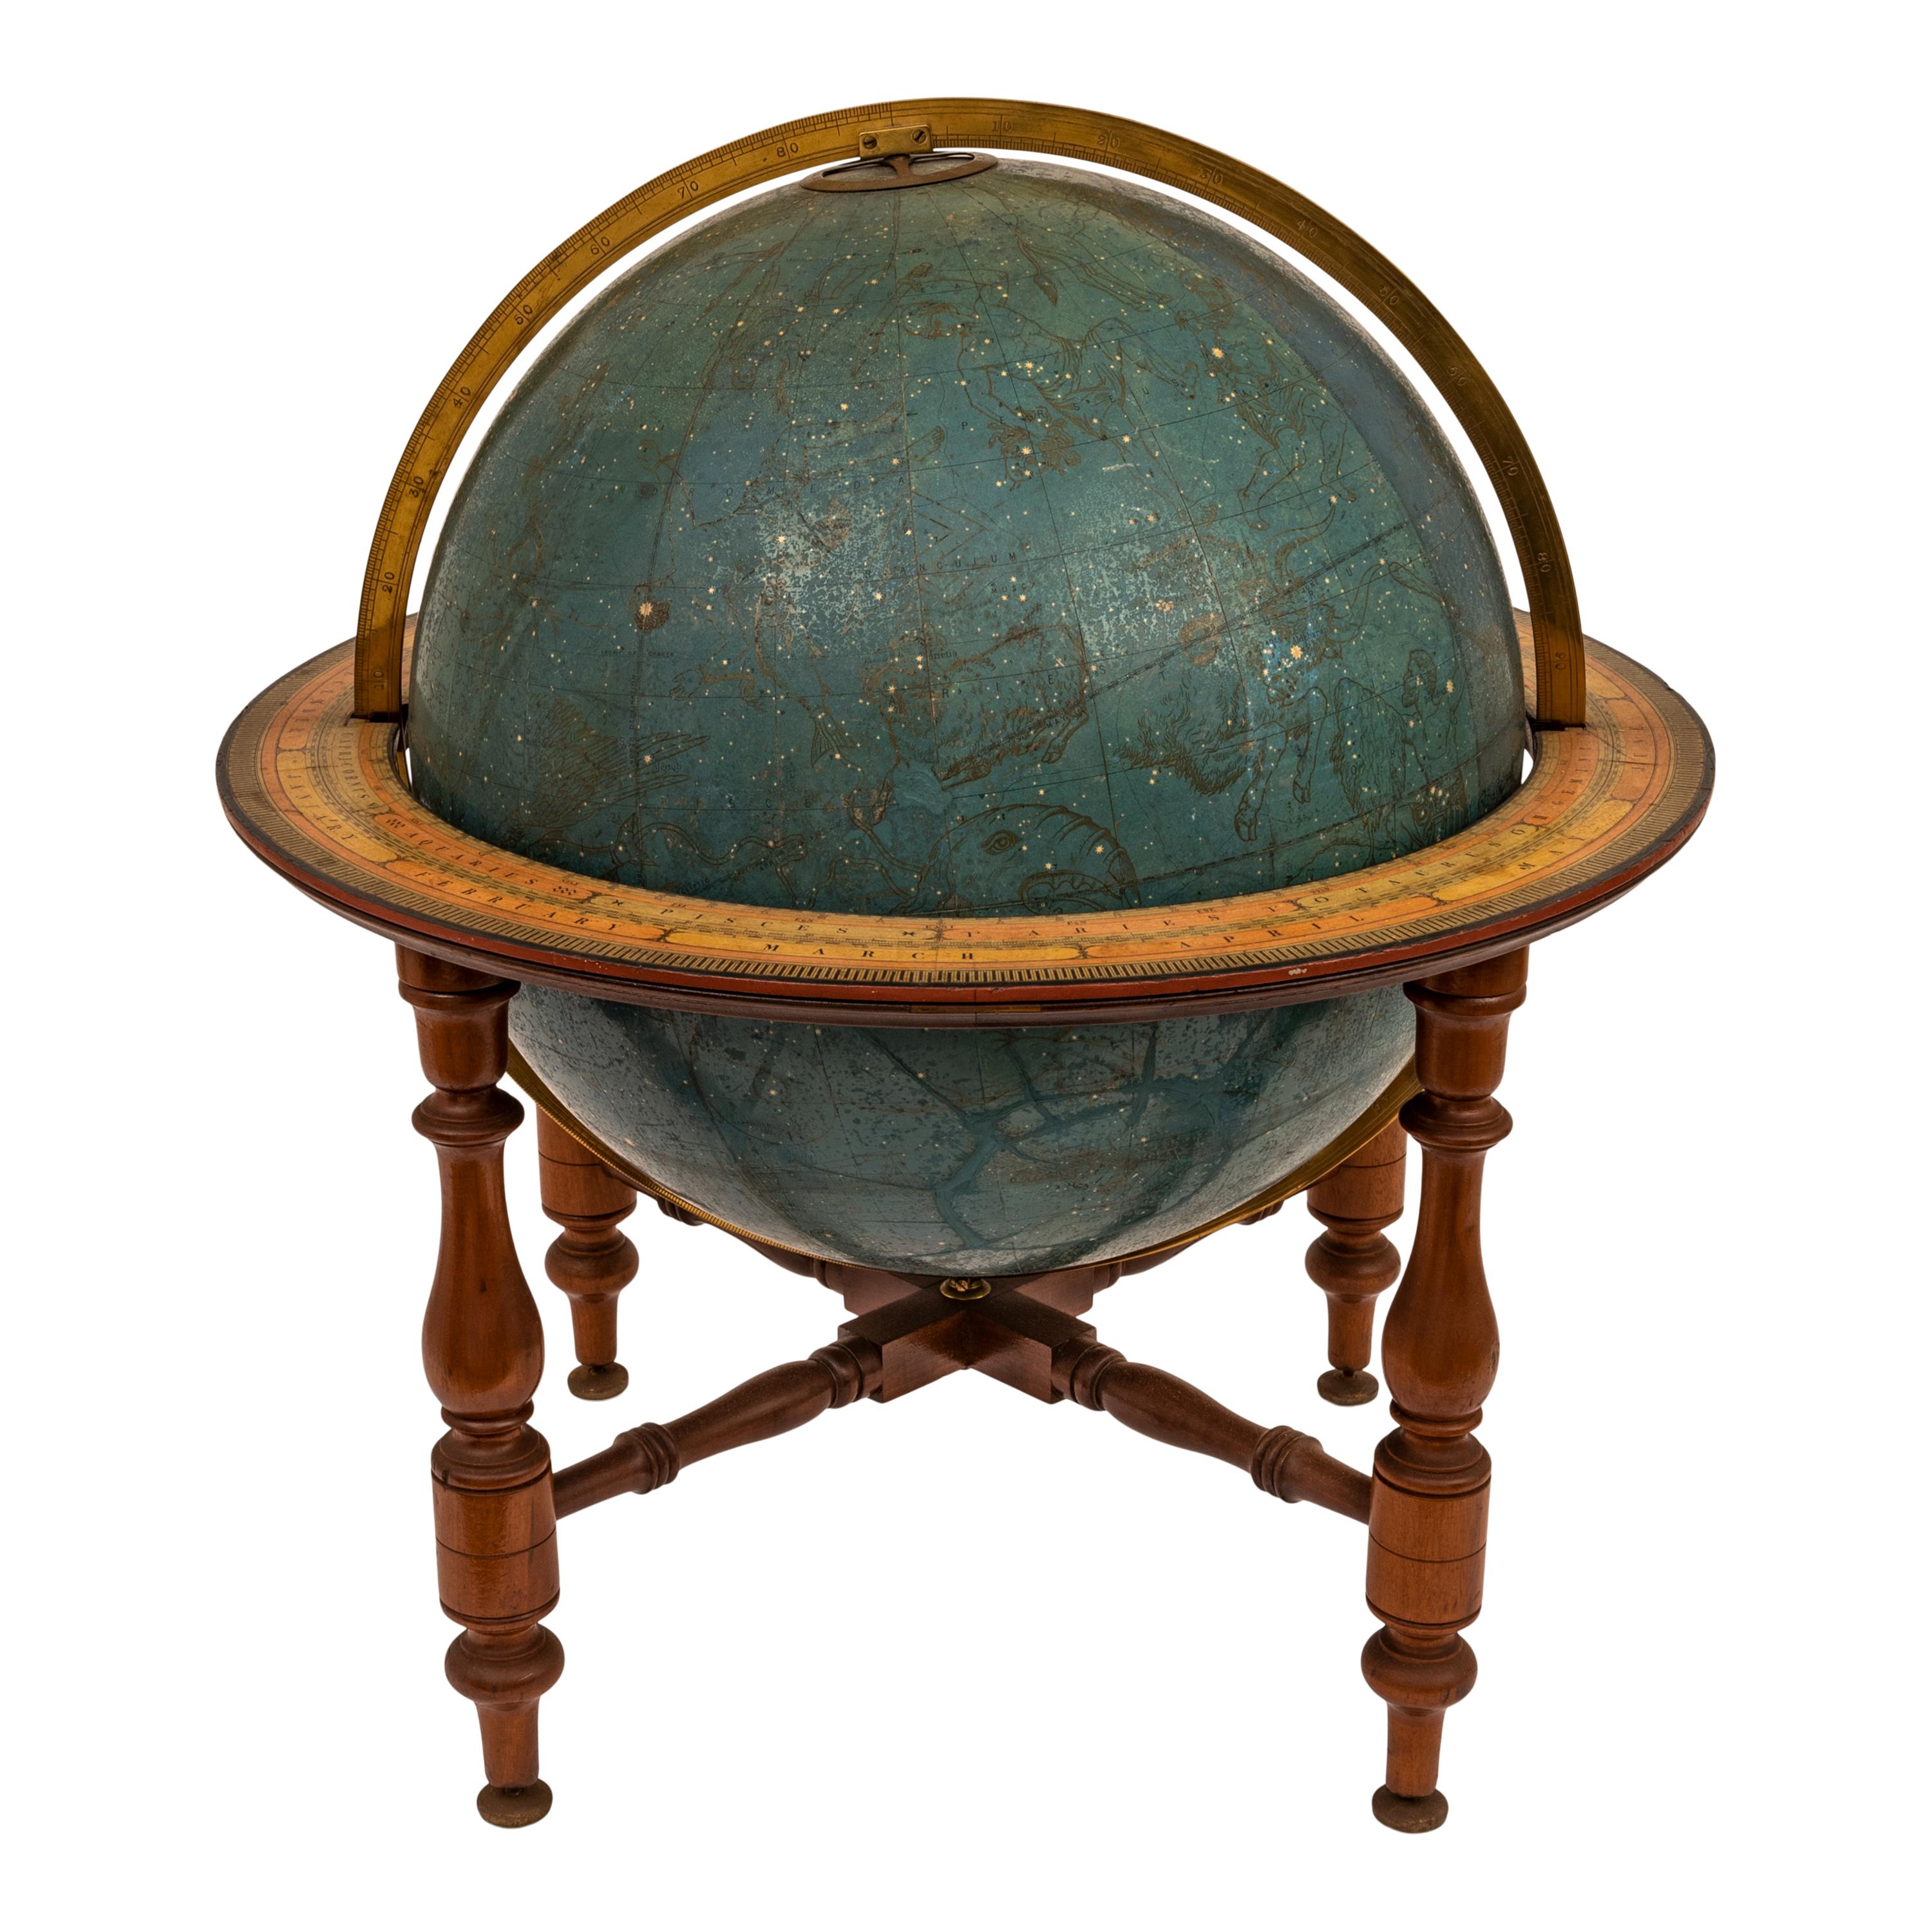 A very fine antique Celestial floor globe on stand by W. & A.K. Johnston, 1879.

Representation of stars and constellations as they would appear on a sphere (Celestial sphere) of infinite radius with the Earth at the center. Given a particular time